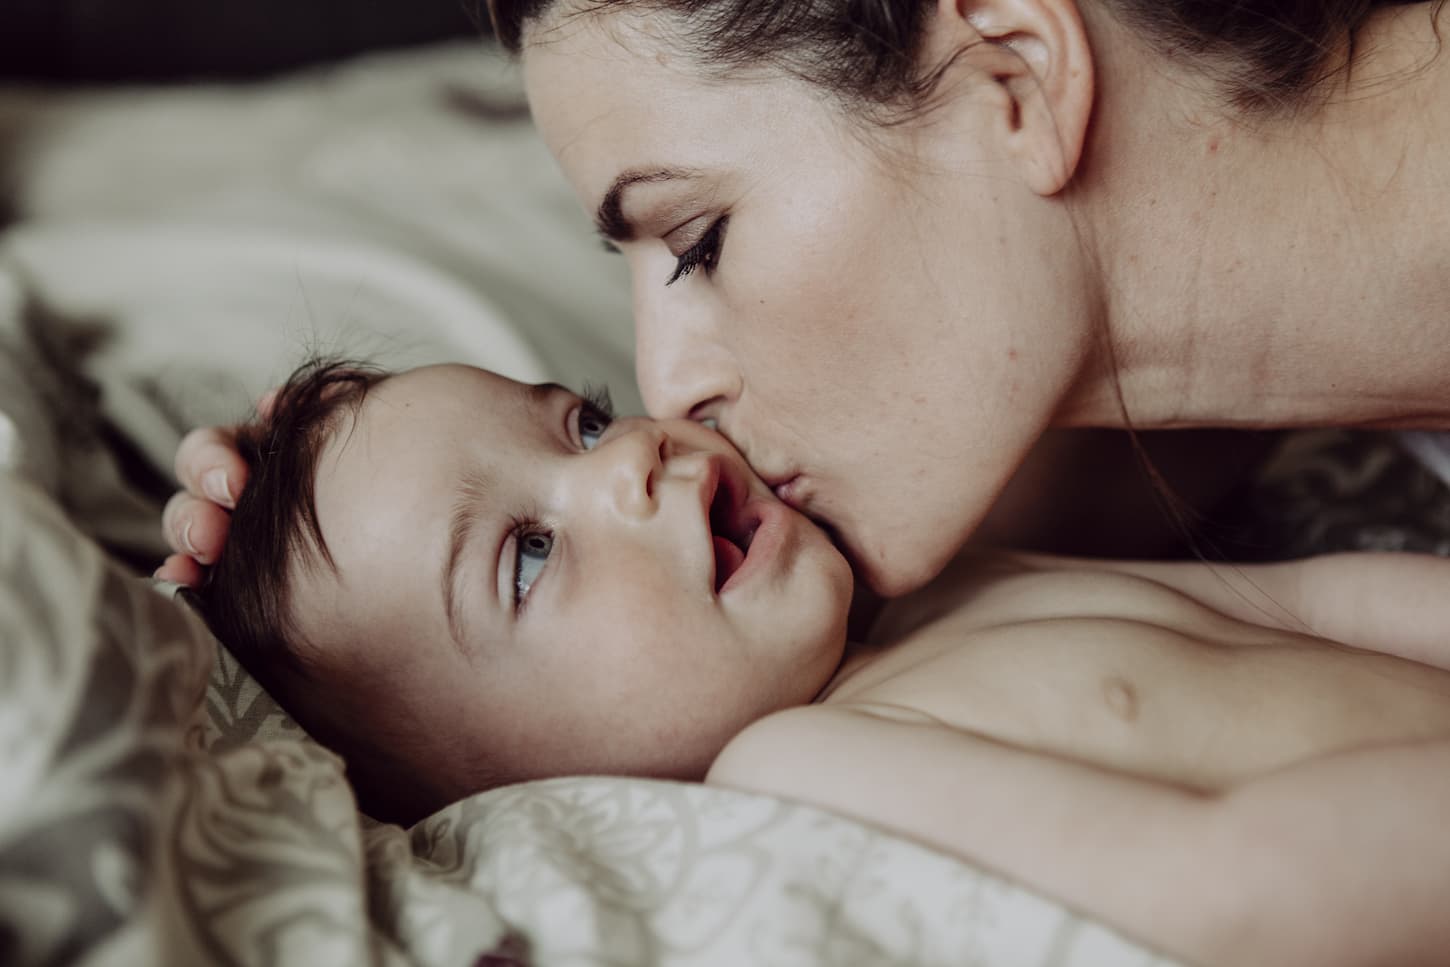 An image of a mother cuddling her baby son on the bed.